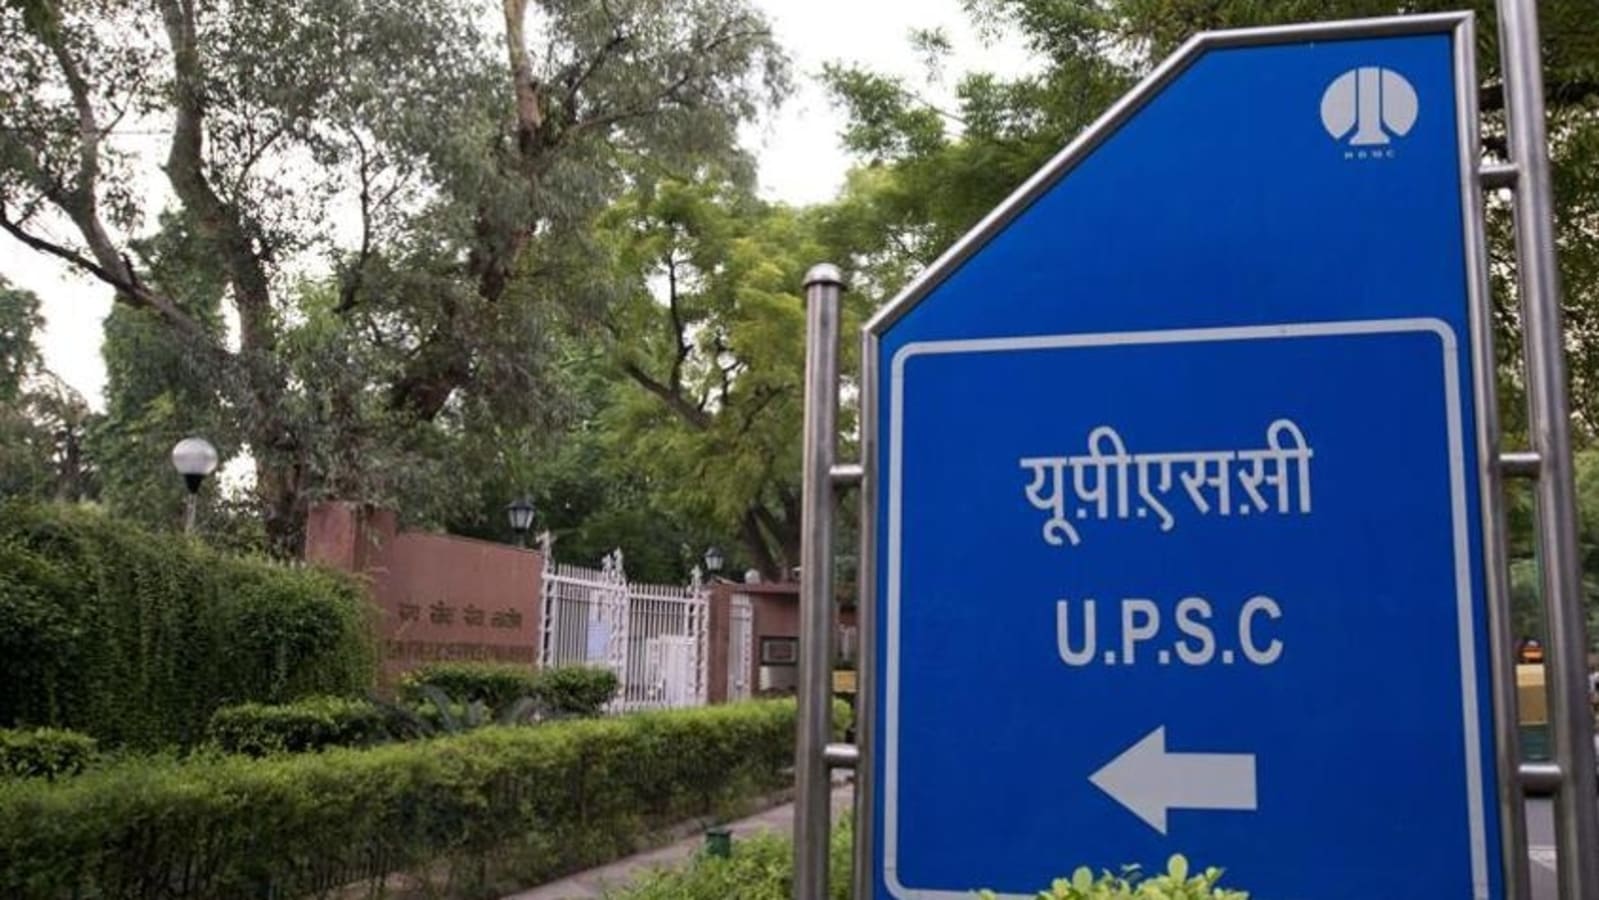 UPSC CDS II 2021: Last date today to apply for 339 posts on upsc.gov.in